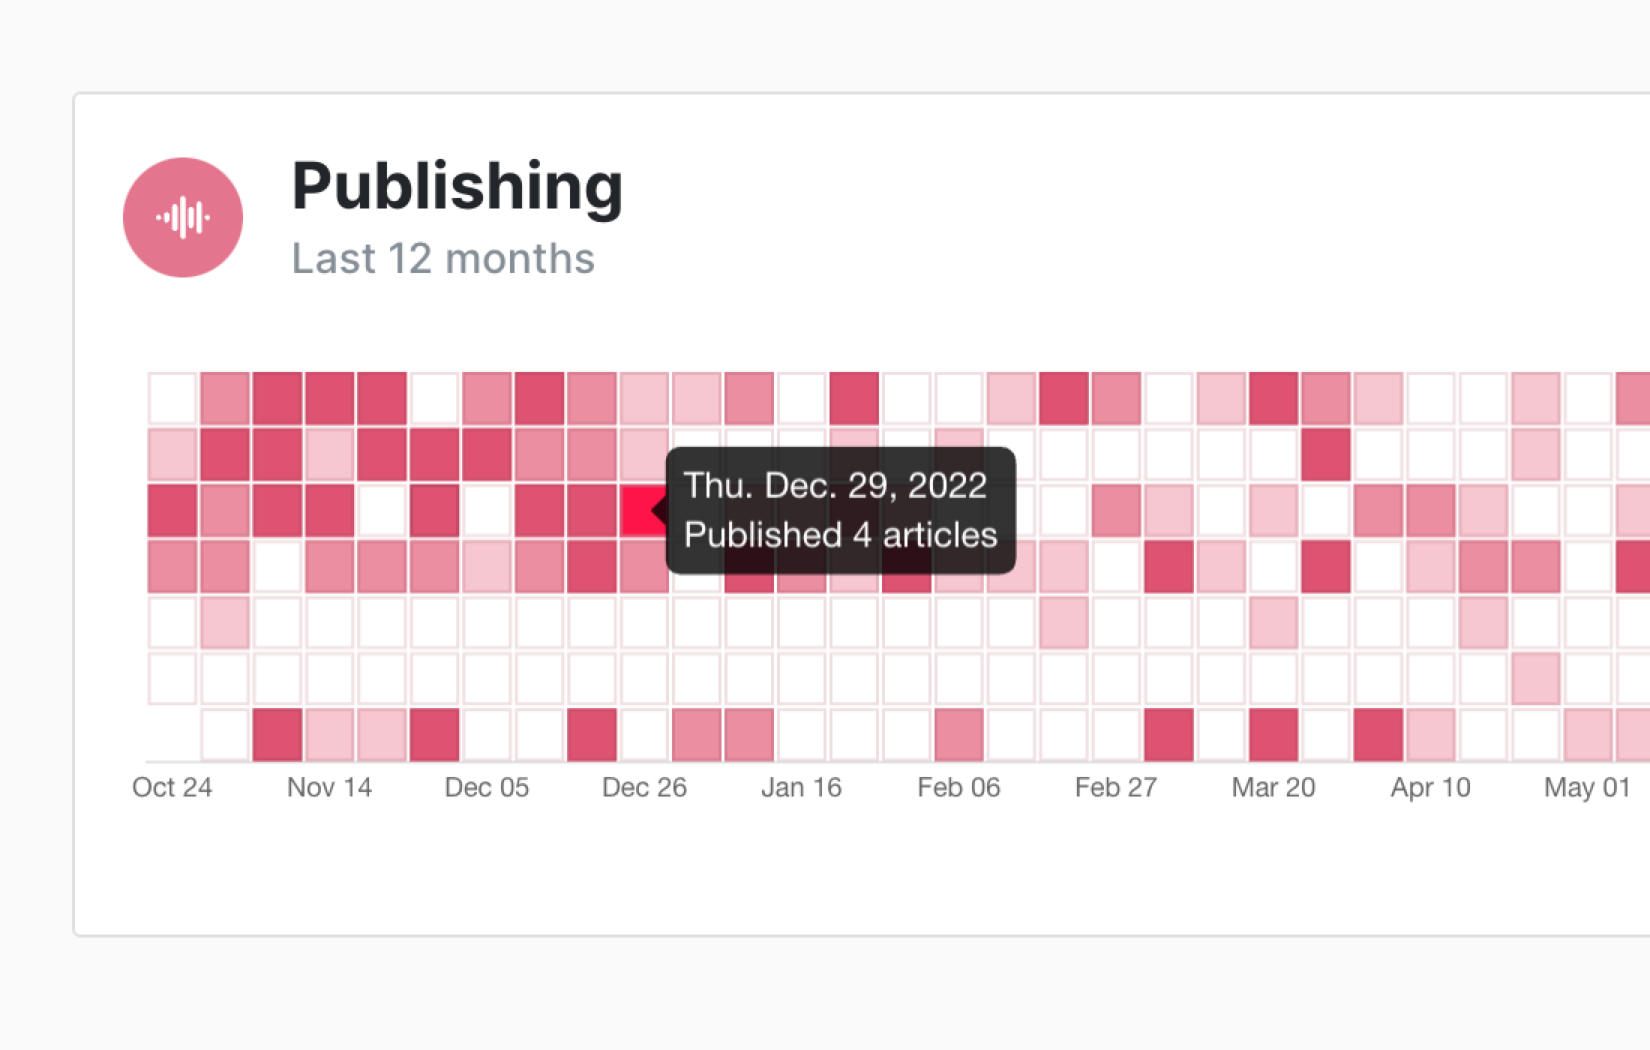 Visualize team and individual publishing frequency